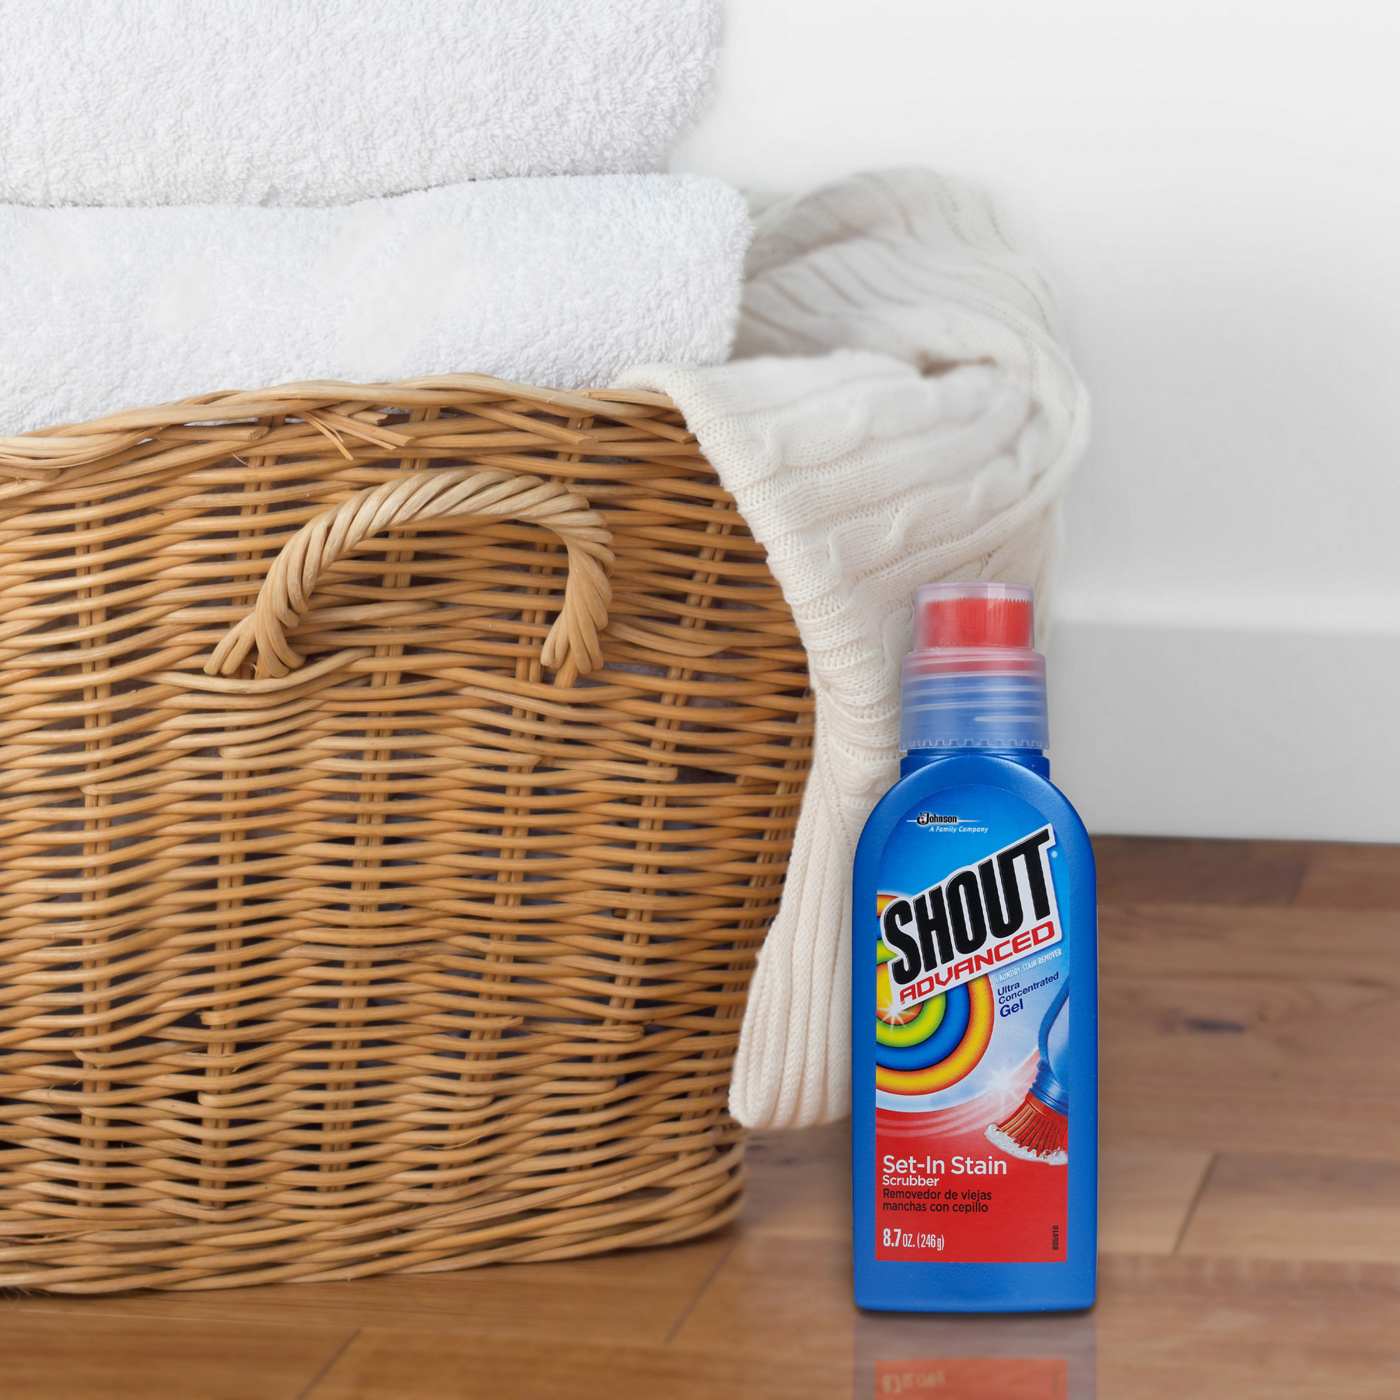 Shout Advanced Ultra Concentrated Gel Laundry Stain Remover; image 9 of 9